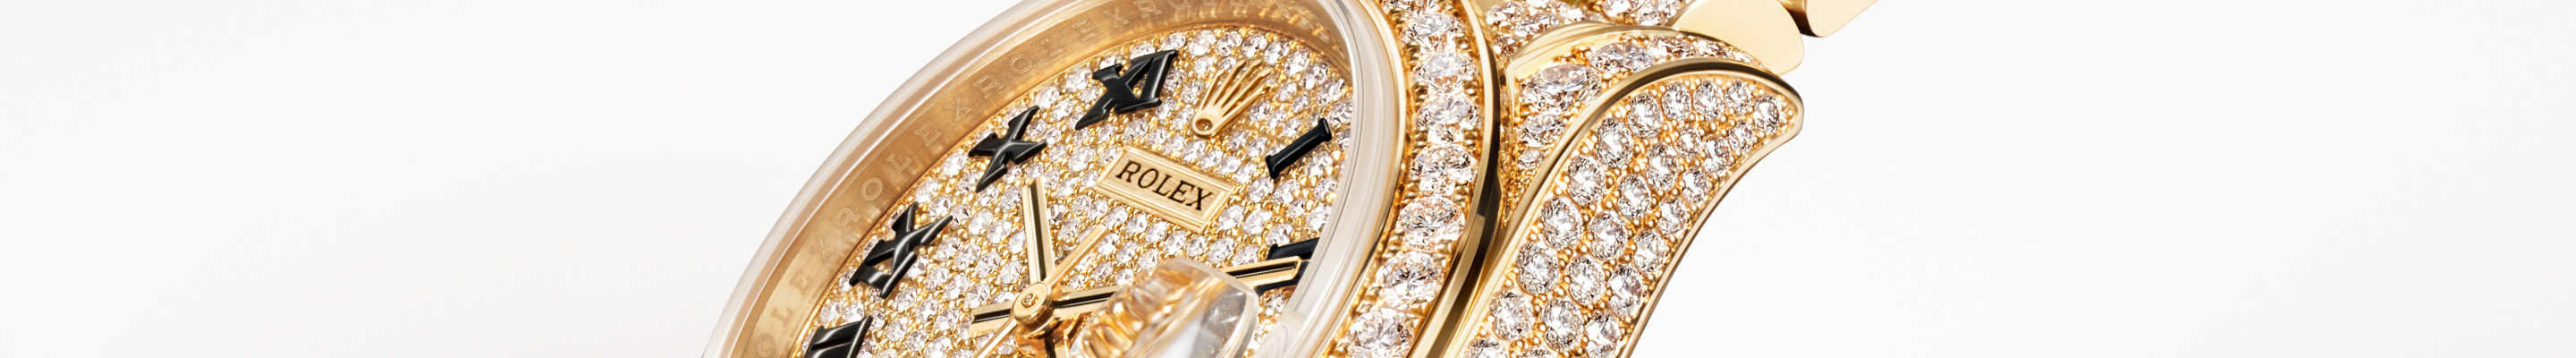 Rolex Lady-Datejust family banner